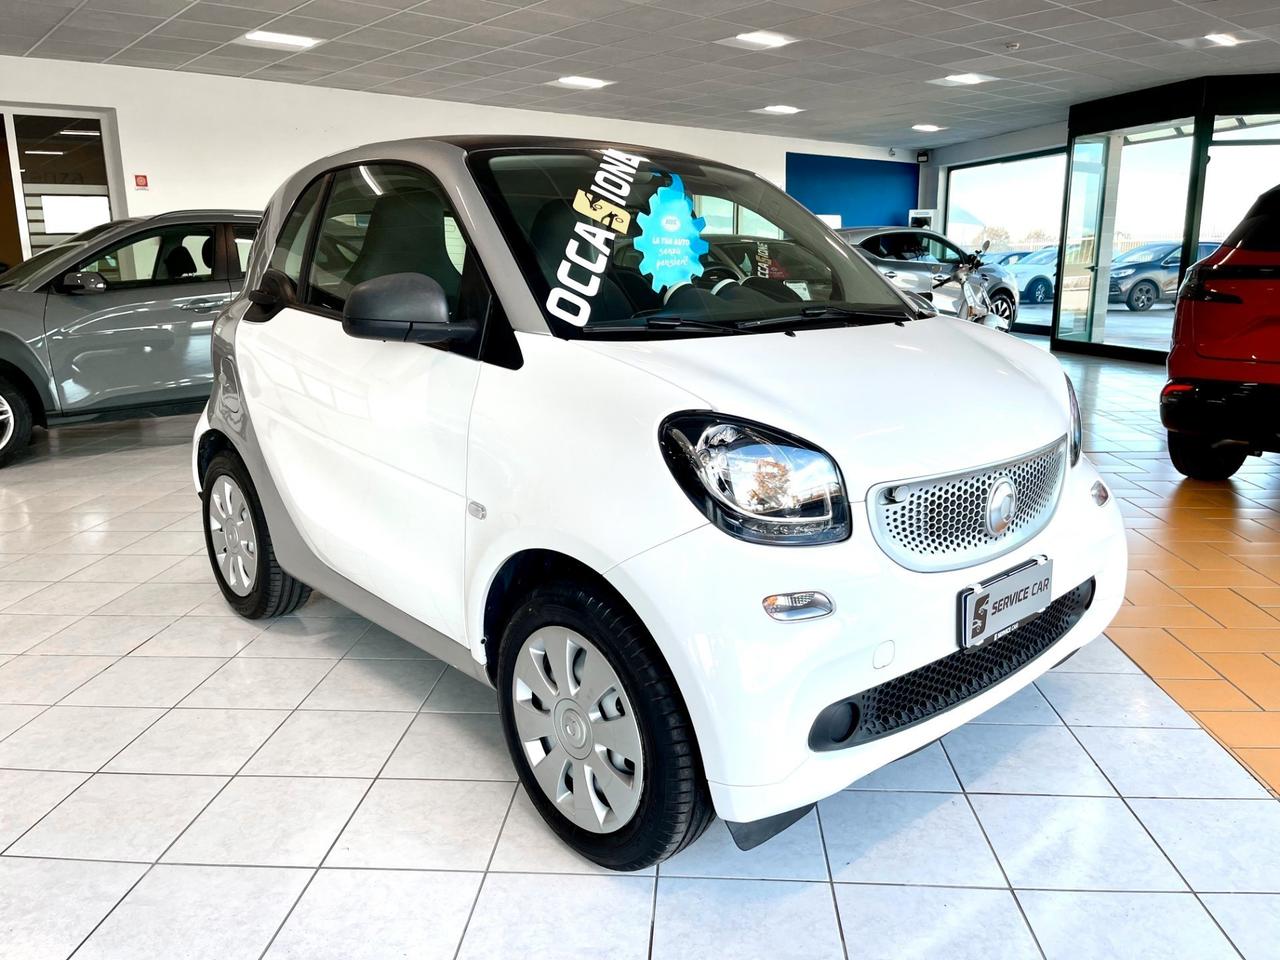 Smart ForTwo 70 1.0